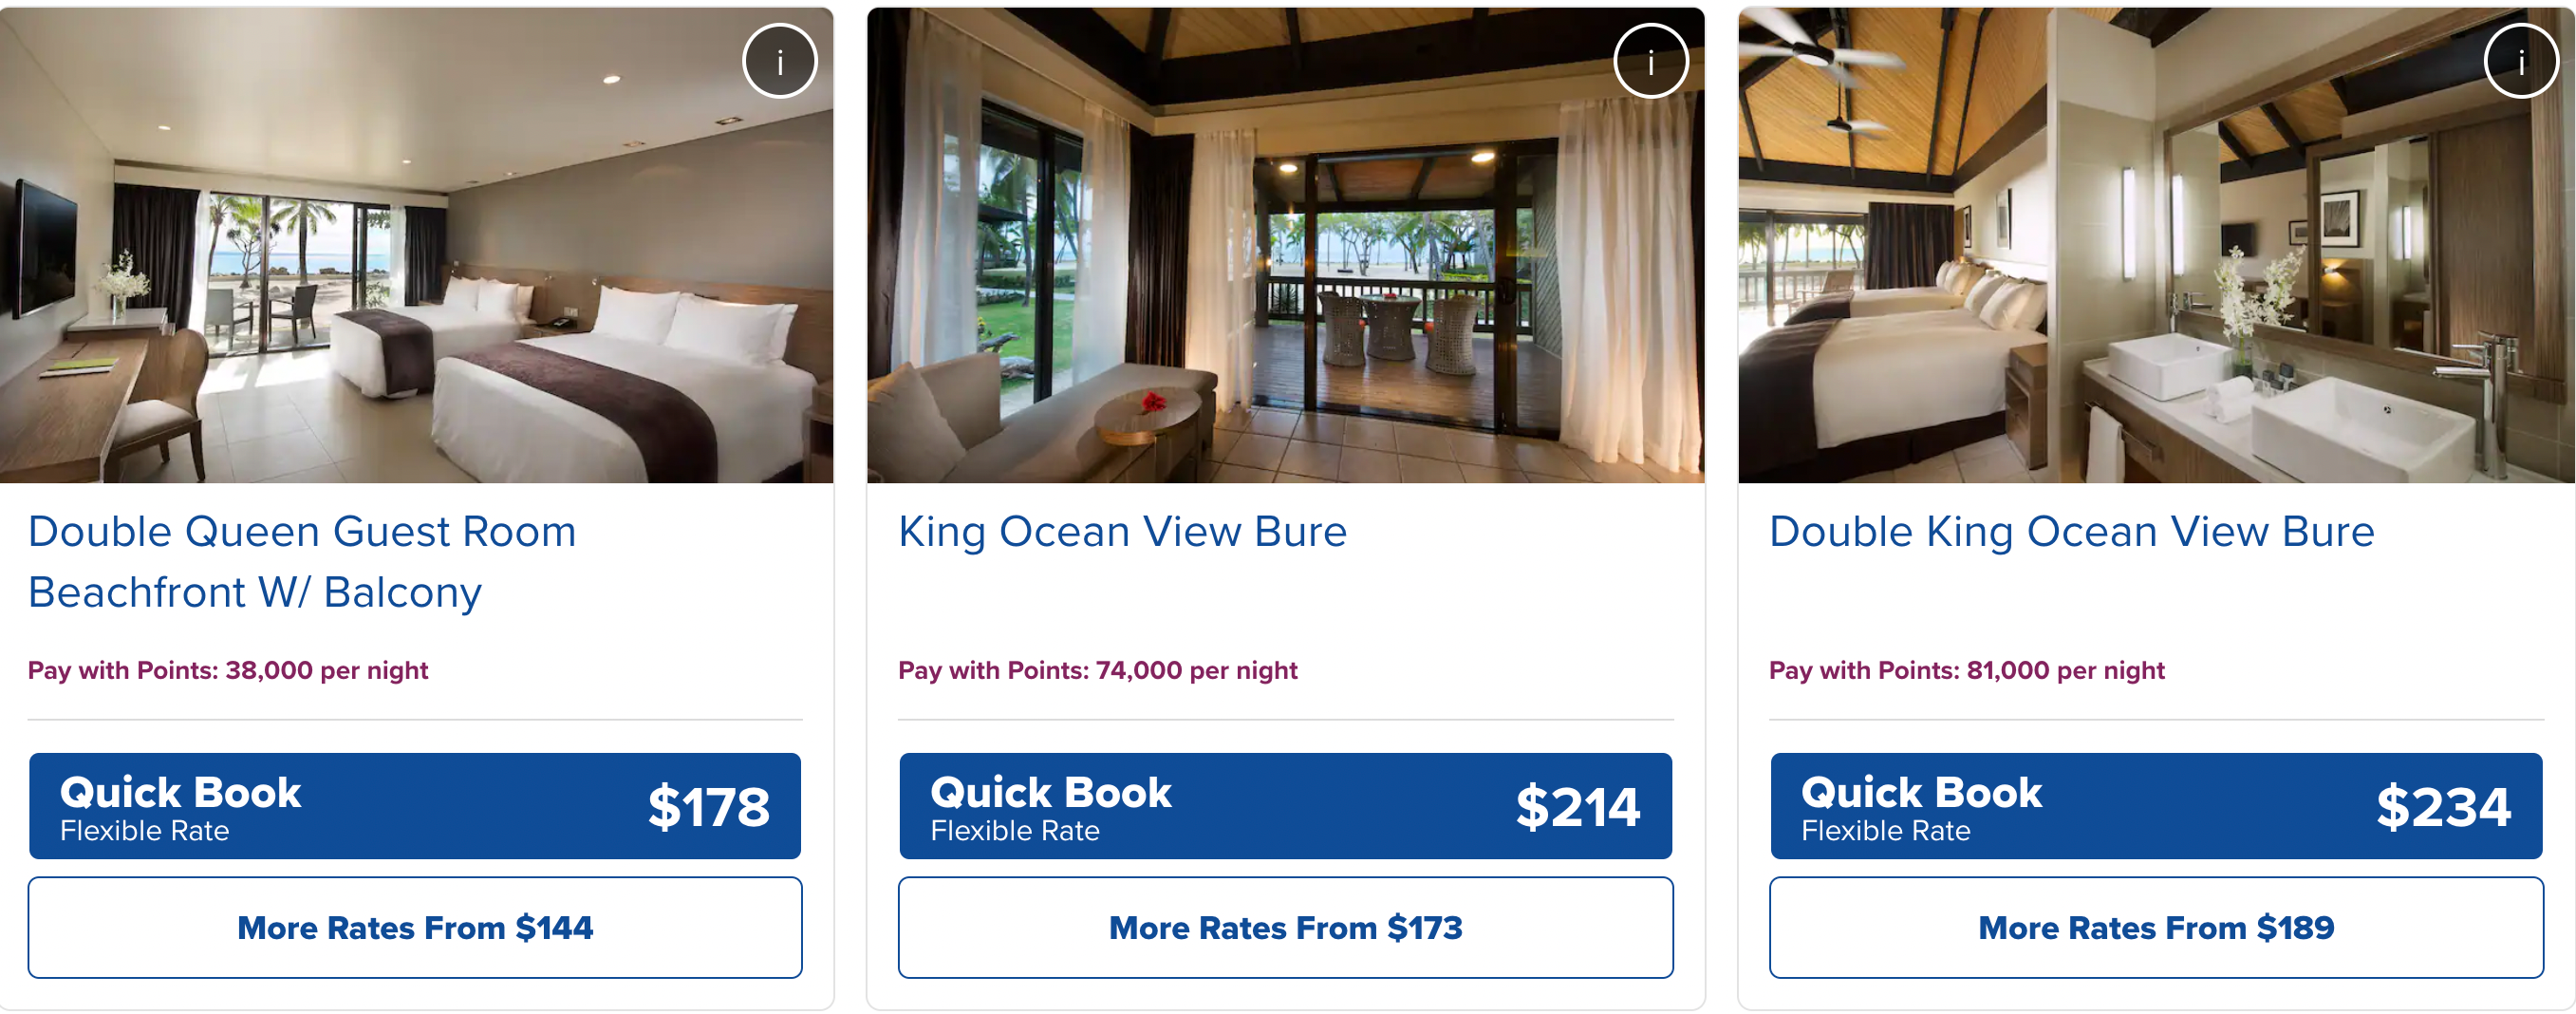 Premium room options at the Doubletree Fiji